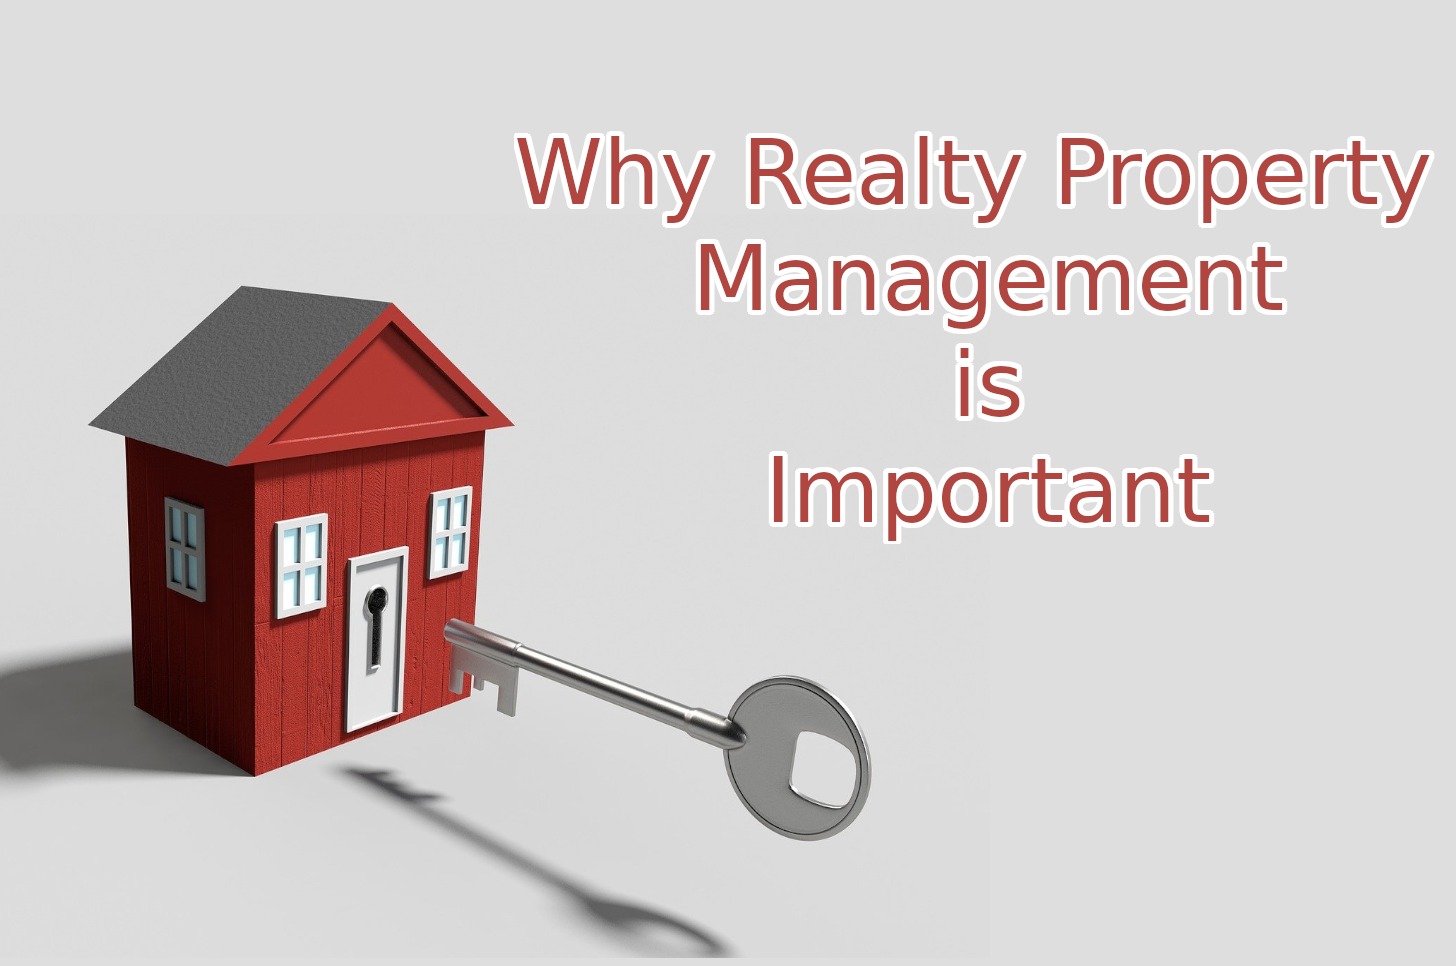 Why Realty Property Management is Important